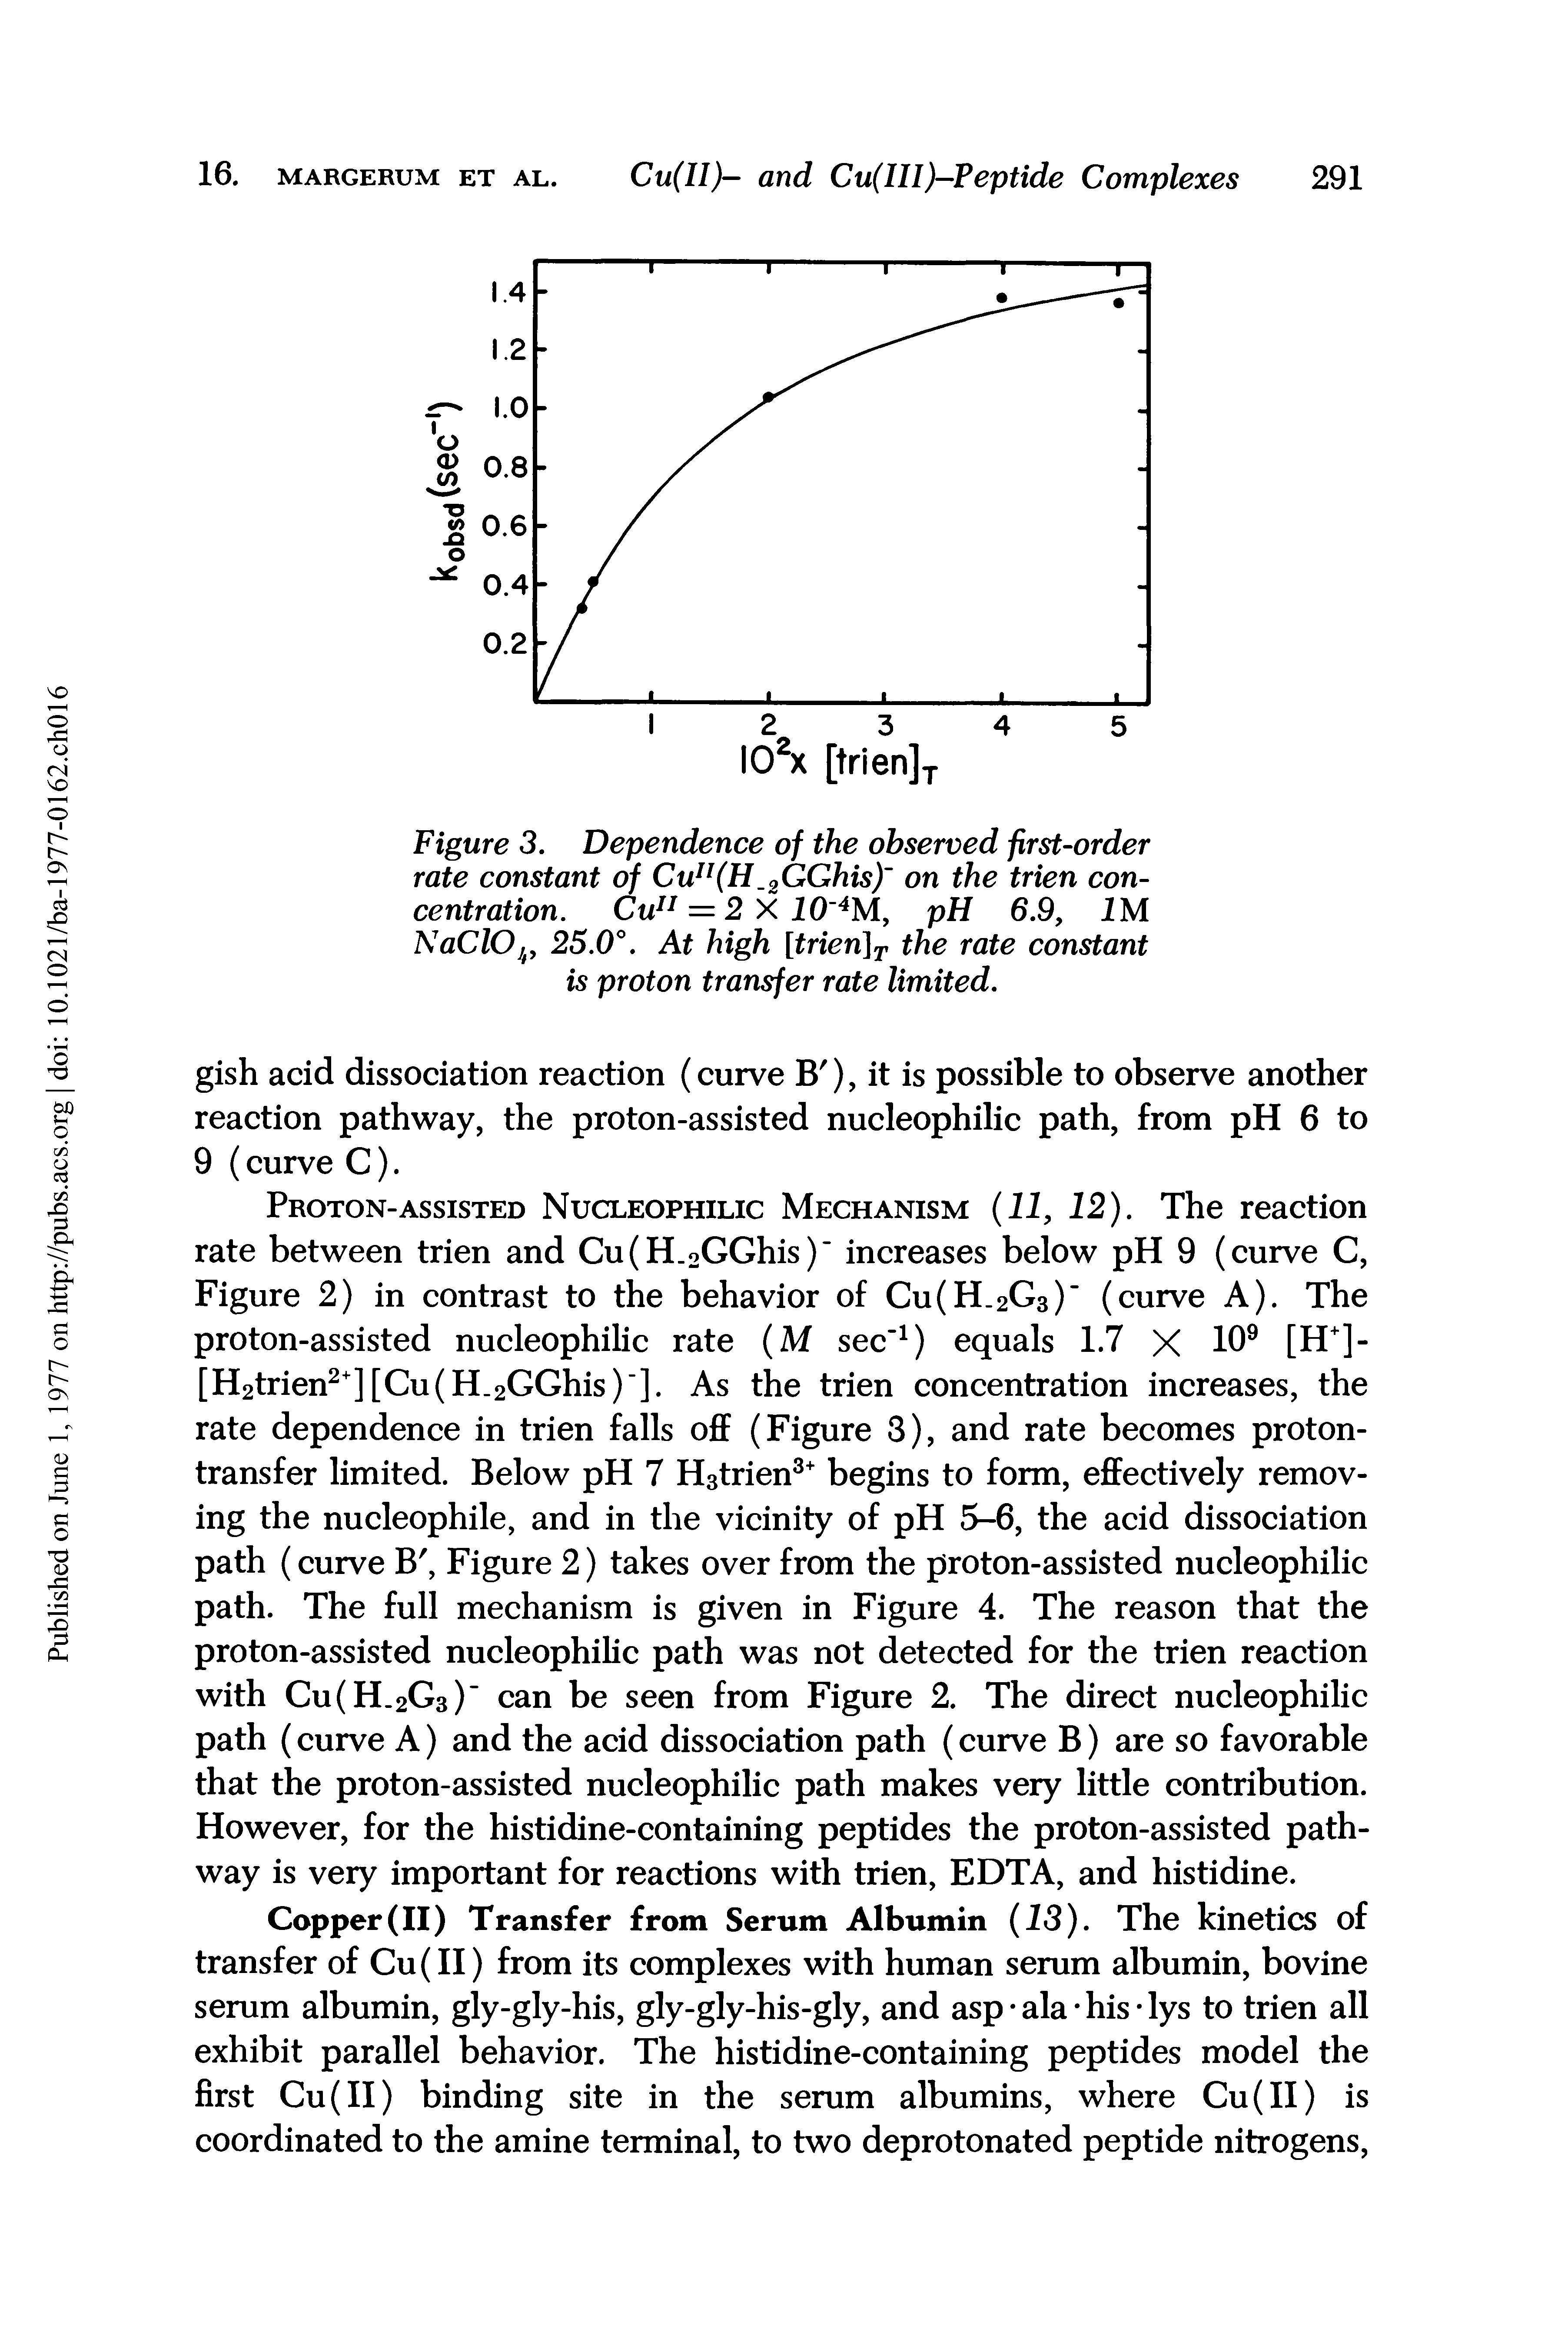 Figure 3. Dependence of the observed first-order rate constant of Cun(H 2GGhis) on the trien concentration. Cu11 = 2 X 10 4M, pH 6.9, 1M NaClOJt, 25.0°. At high [trien]T the rate constant is proton transfer rate limited.